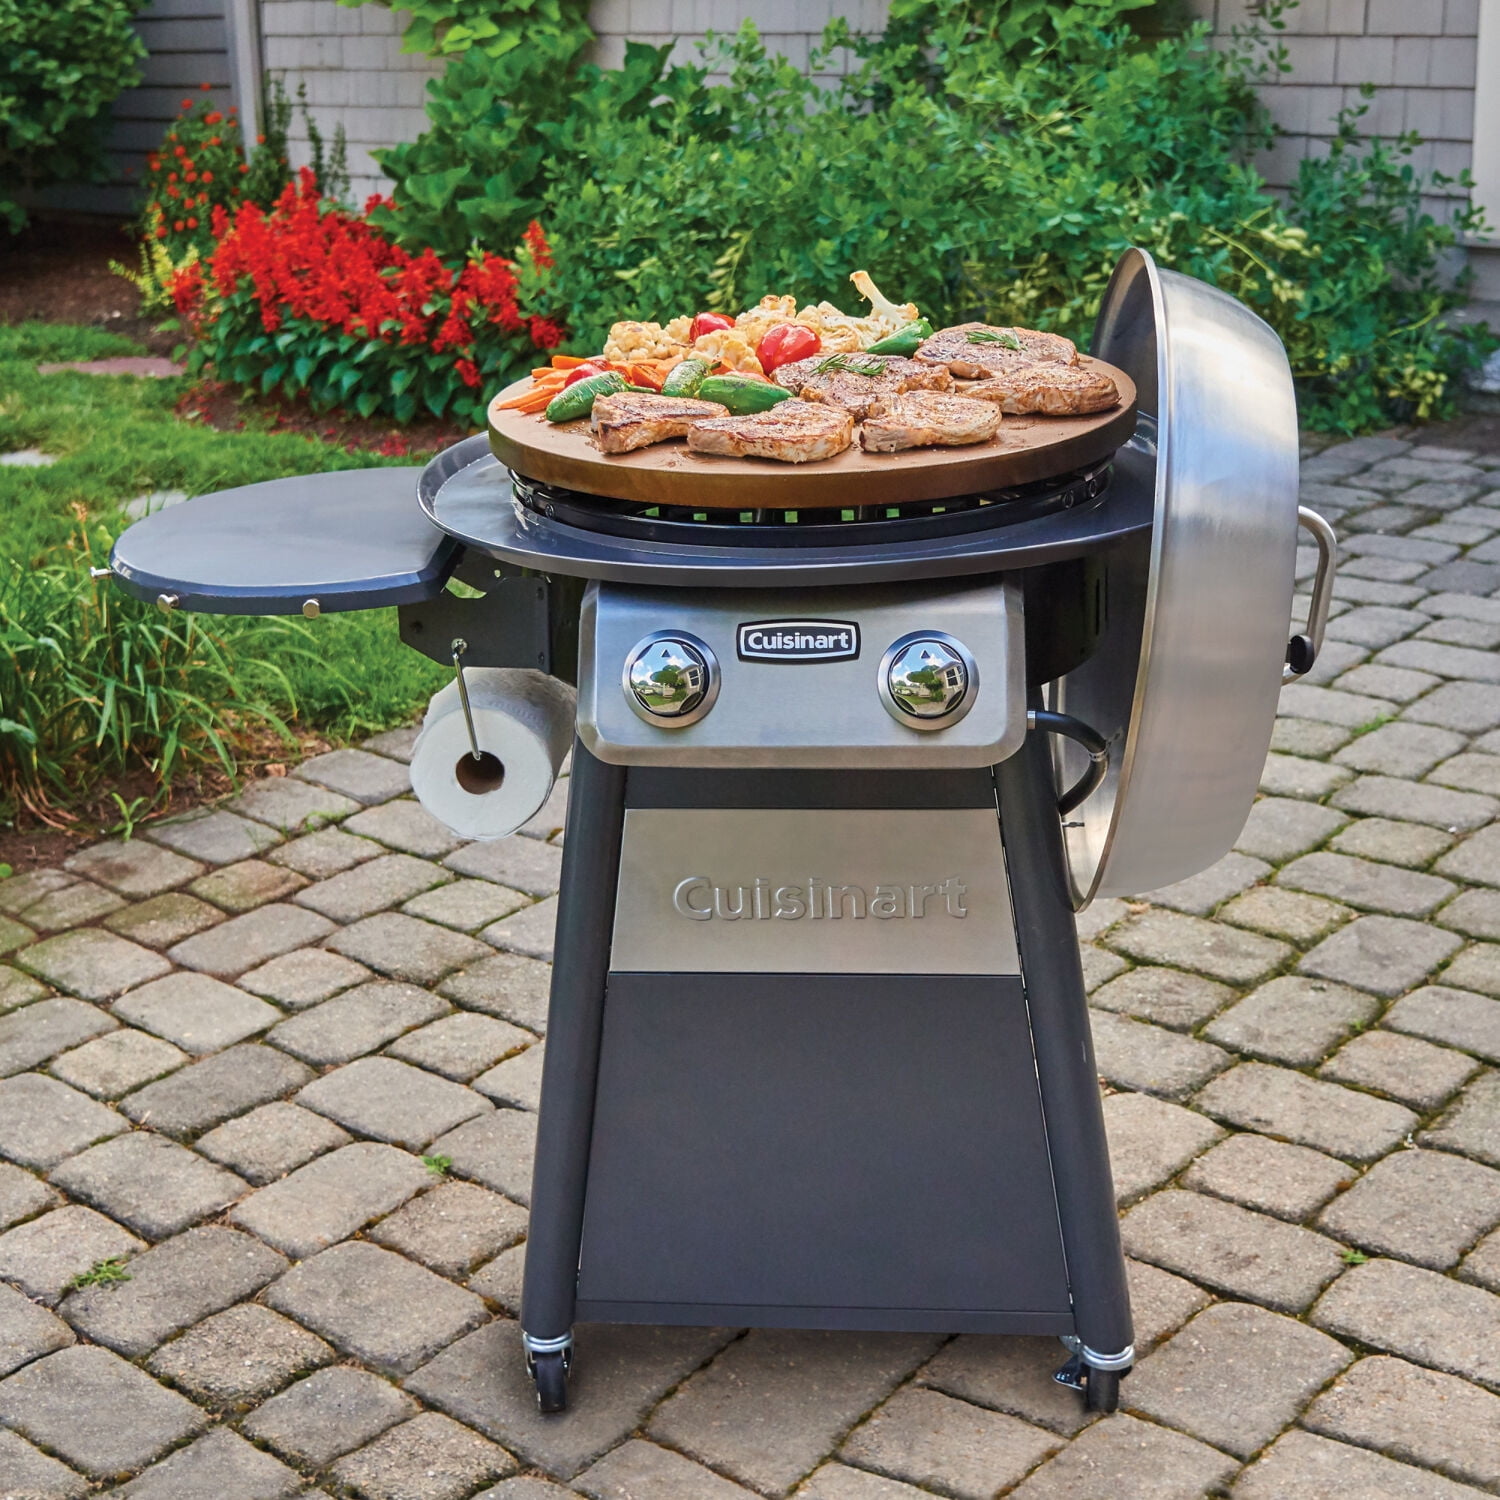 Cuisinart's 22-inch round flat top grill falls to lowest price in